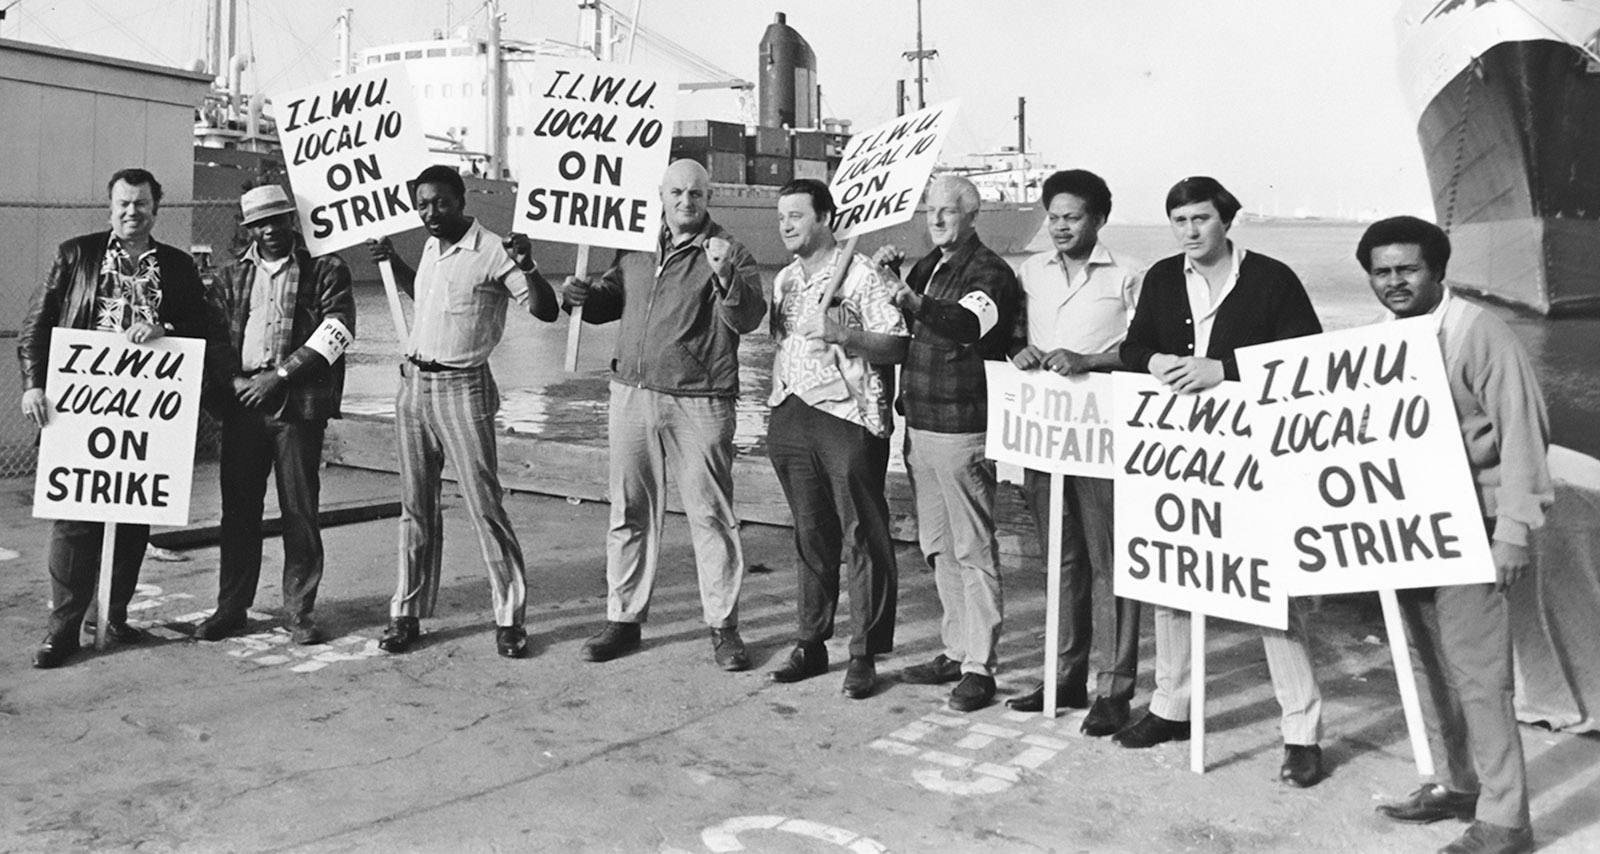 Members of Local 10 of the International Longshore and Warehouse Union